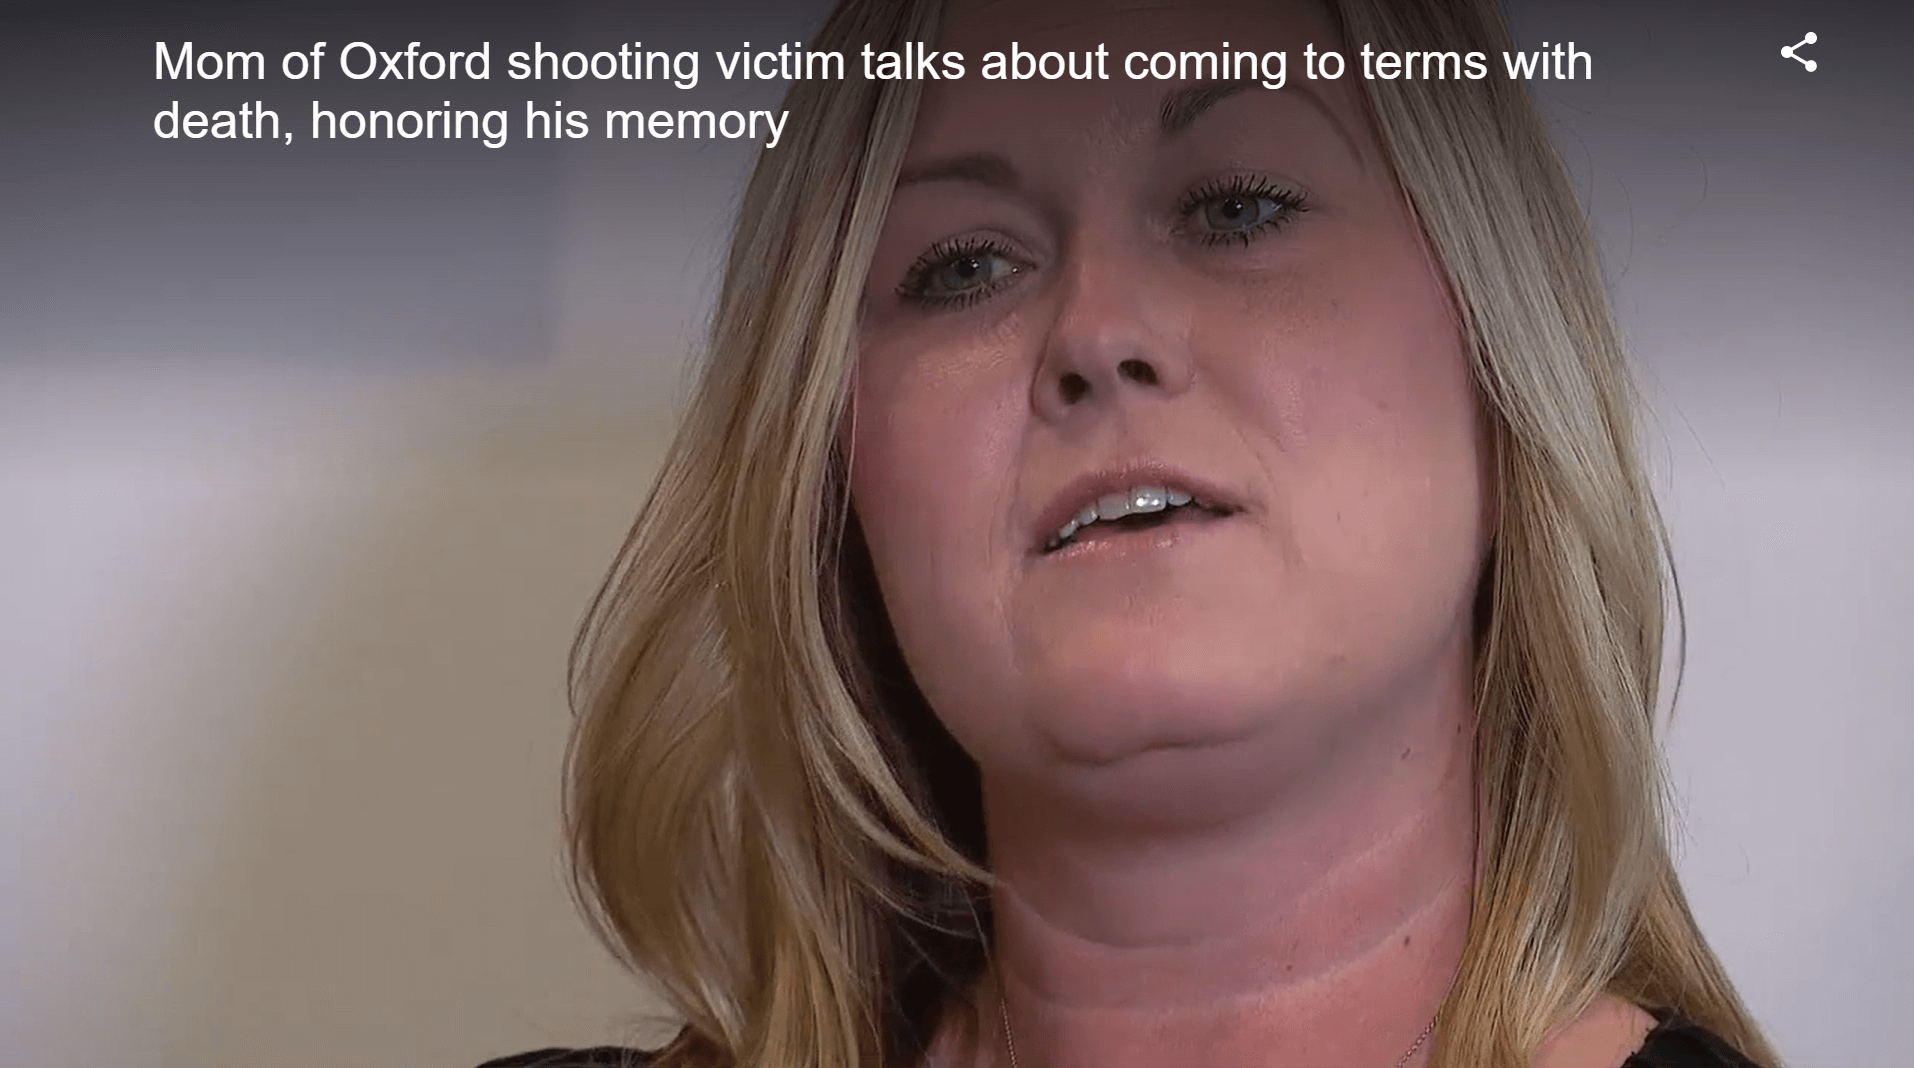 Screen capture of Jill Soave, mother of Justin Shilling who was killed at the Oxford High School shooting last year, talking about his gifts of life to others